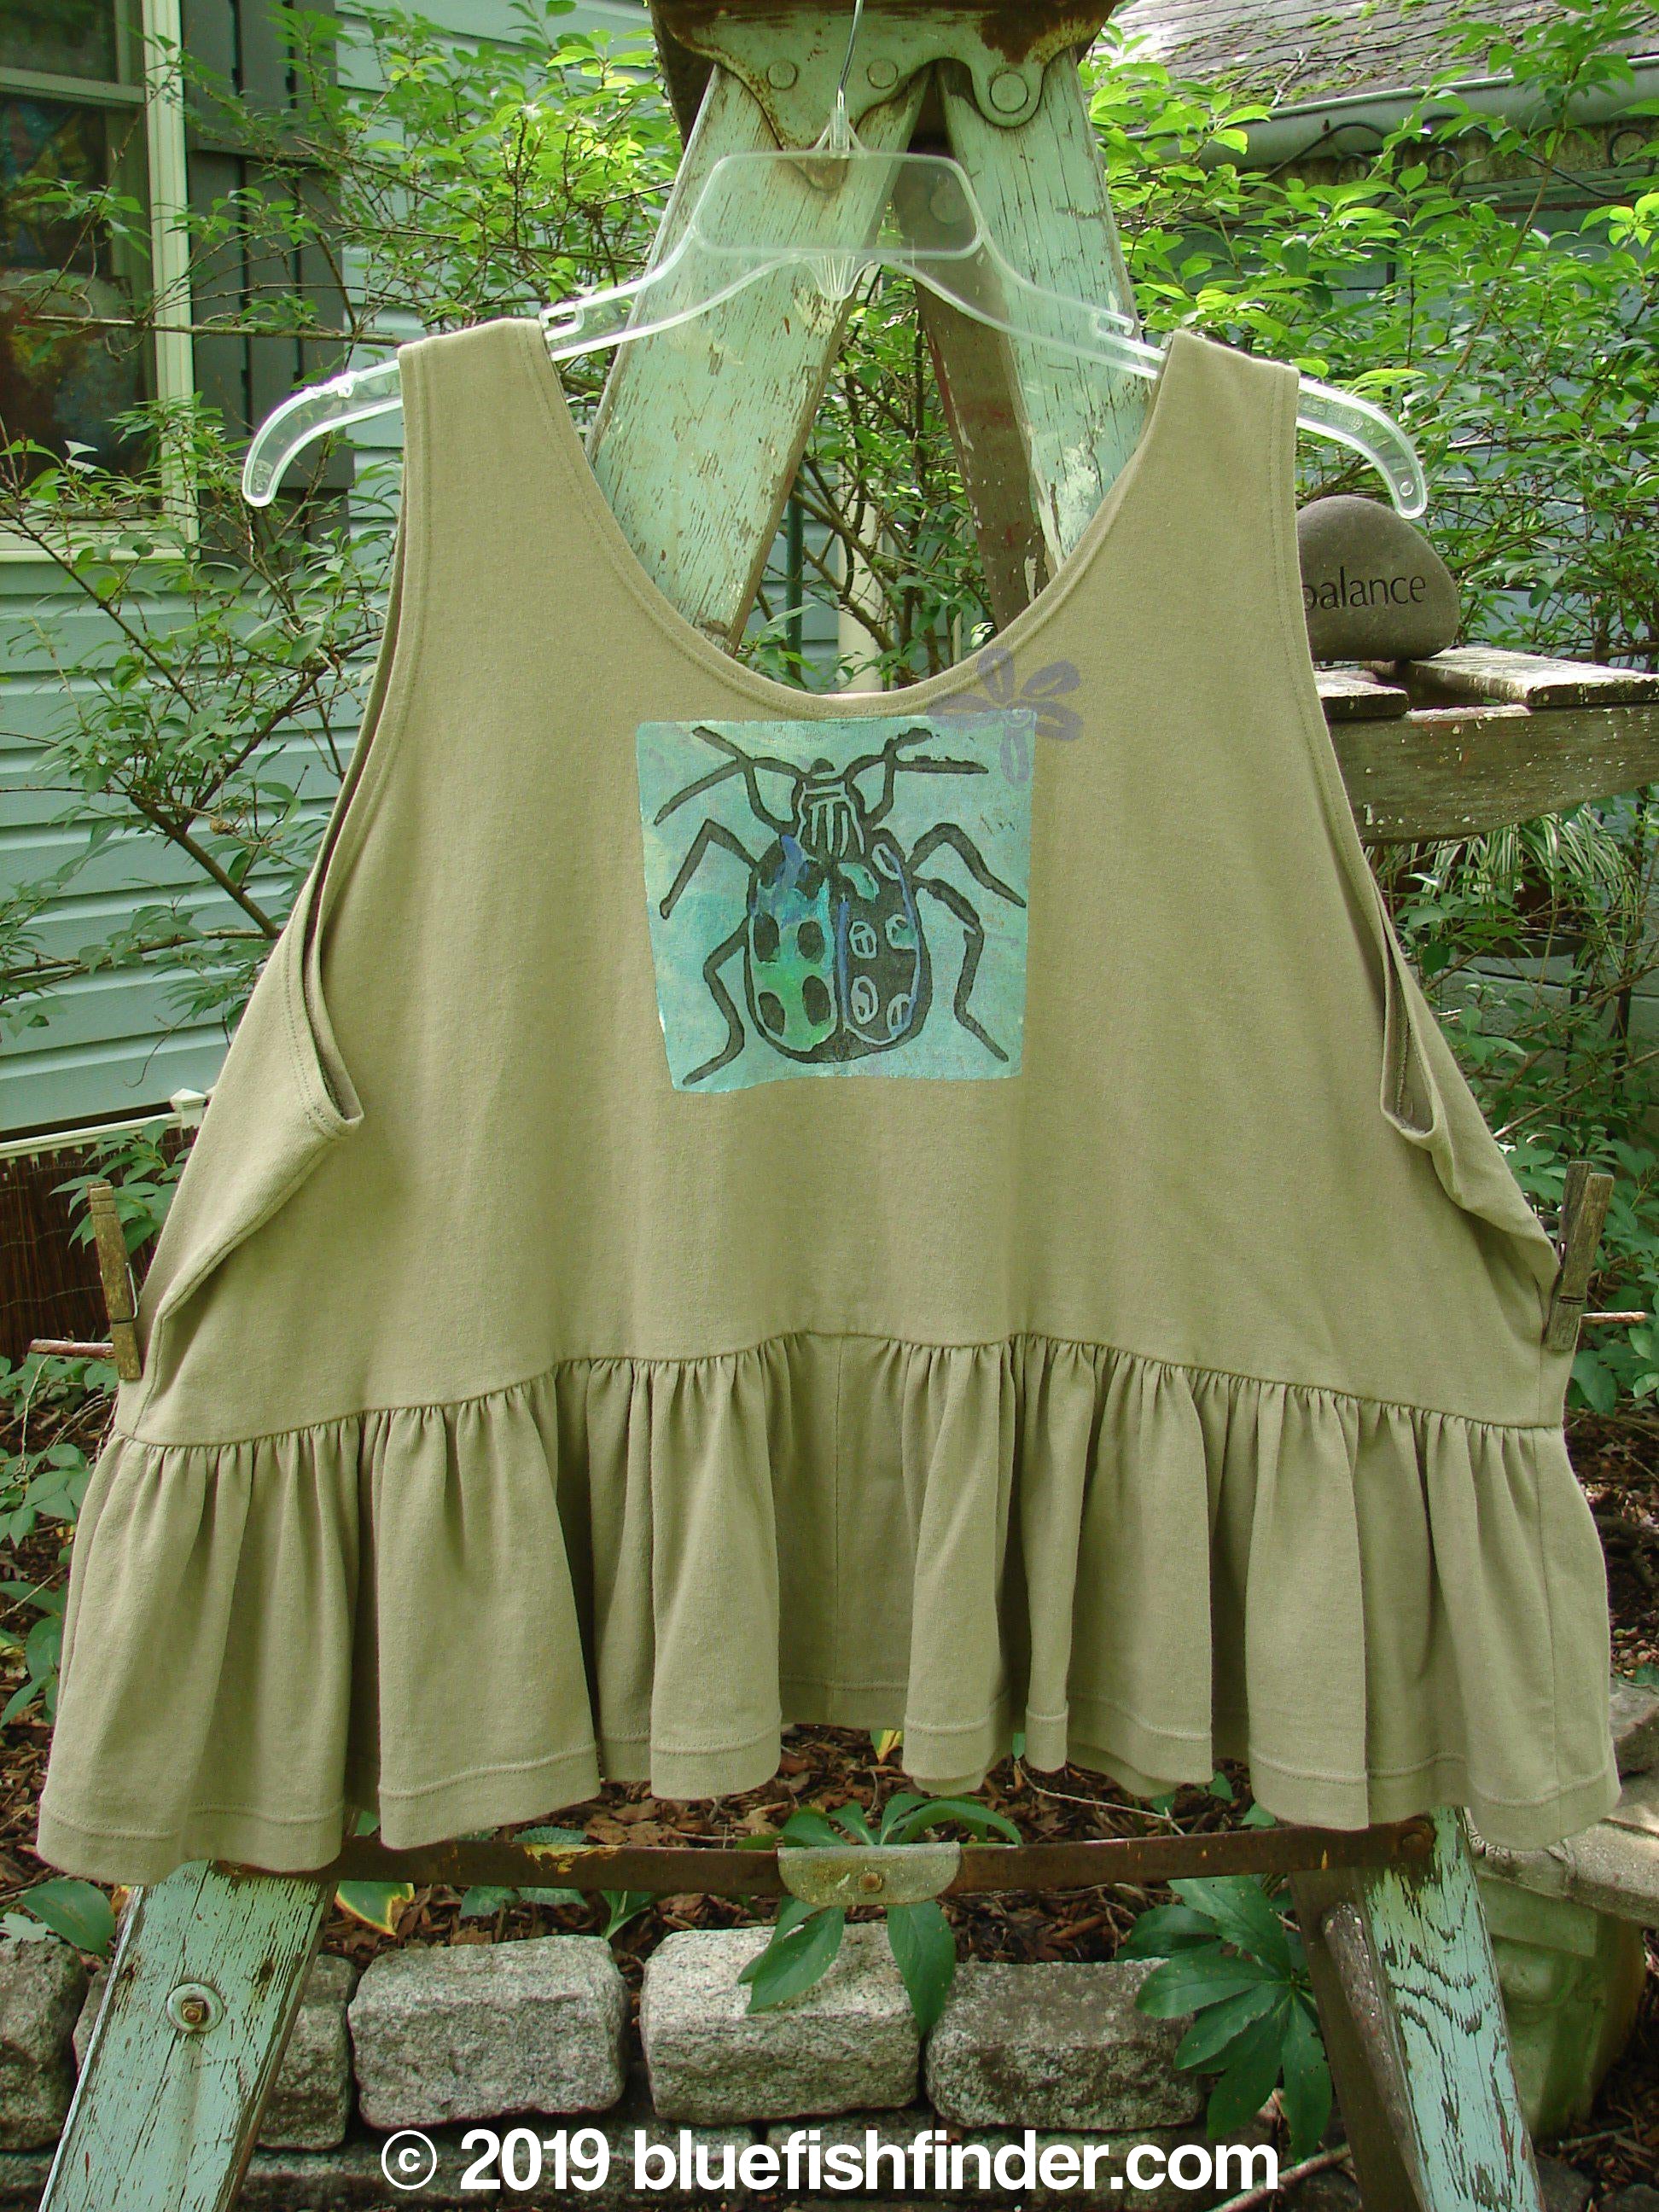 1992 Peplum Top Beetle Wheat OSFA: A rare vintage flounce top with a beetle theme. Mid-weight cotton, yoked waist seam, rounded neckline, wide waist, and gathered bottom flounce. Bust 50, waist 54, hem circumference 100, length 25 inches.